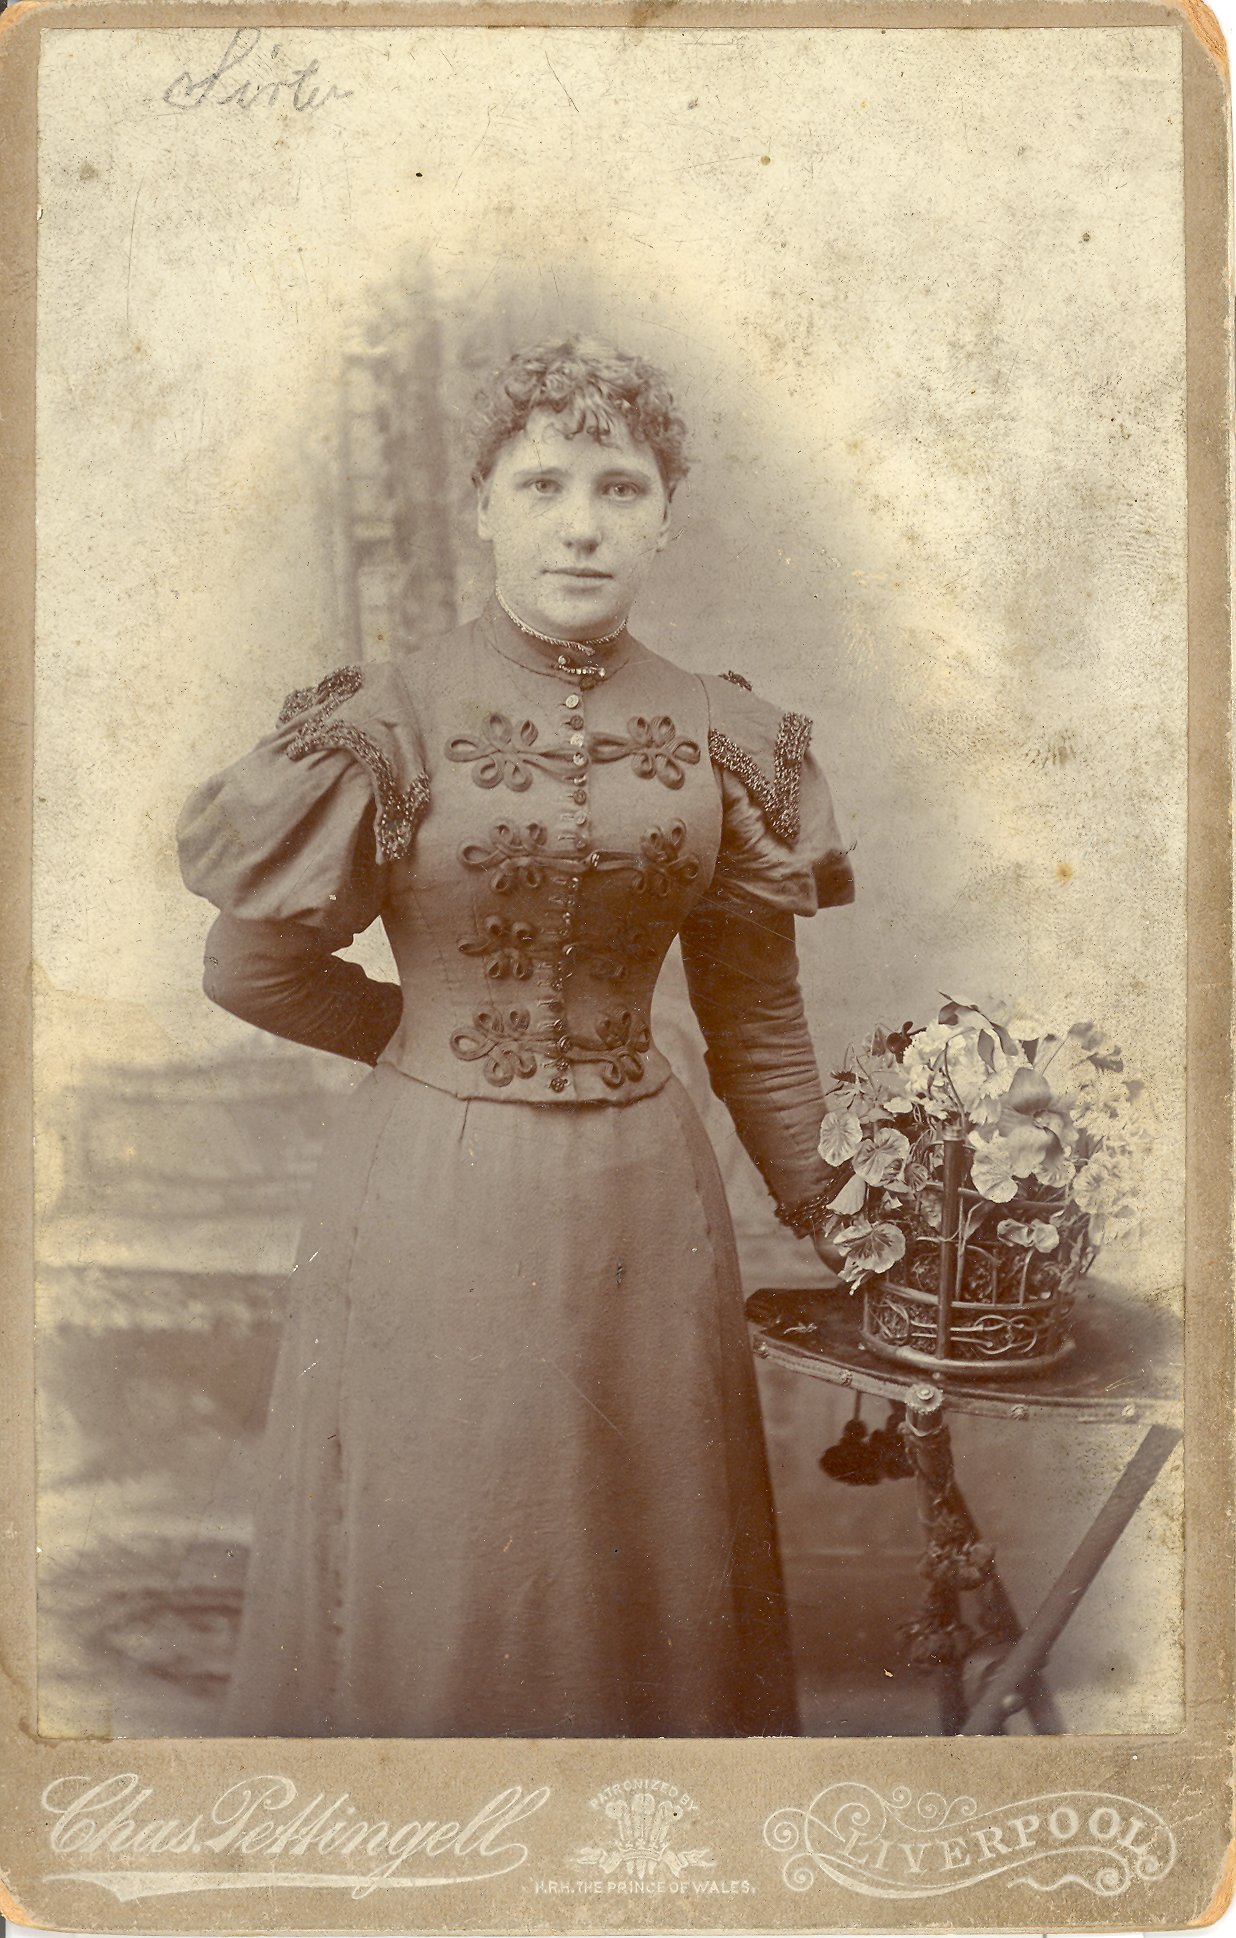 One of the sisters of Charles Gallienne by photographer Chas. Pettingell of 180 London Road, Liverpool.
The front and back of the photo has a logo with the inscription 'Patronized by H.R. H. The Prince of Wales.